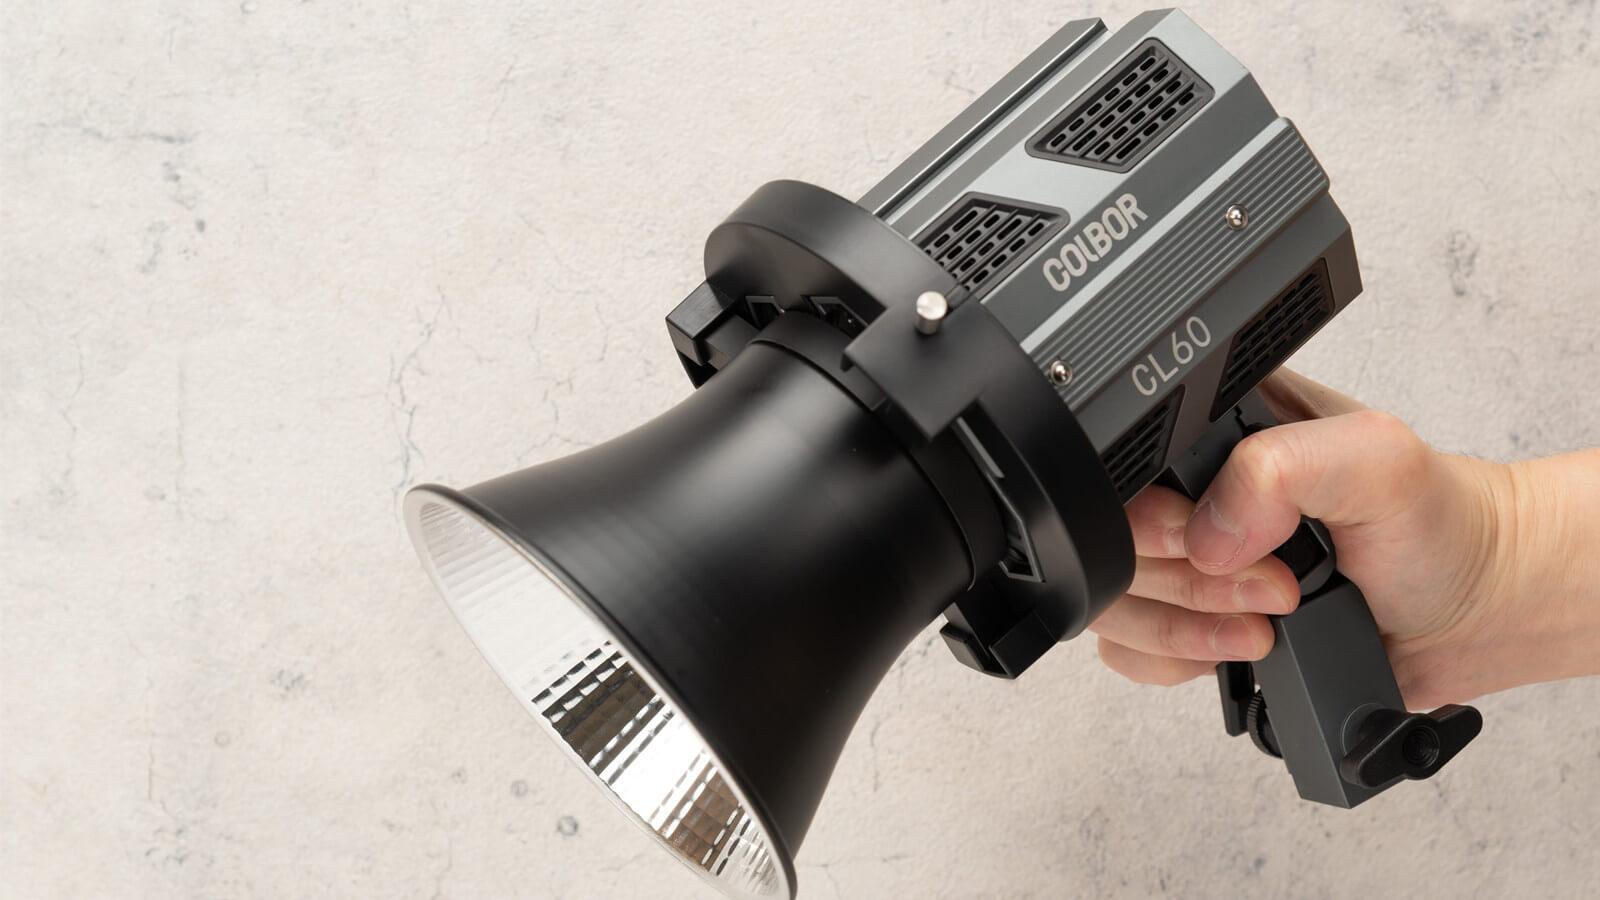 COLBOR CL60 comes with a light base for handheld use.